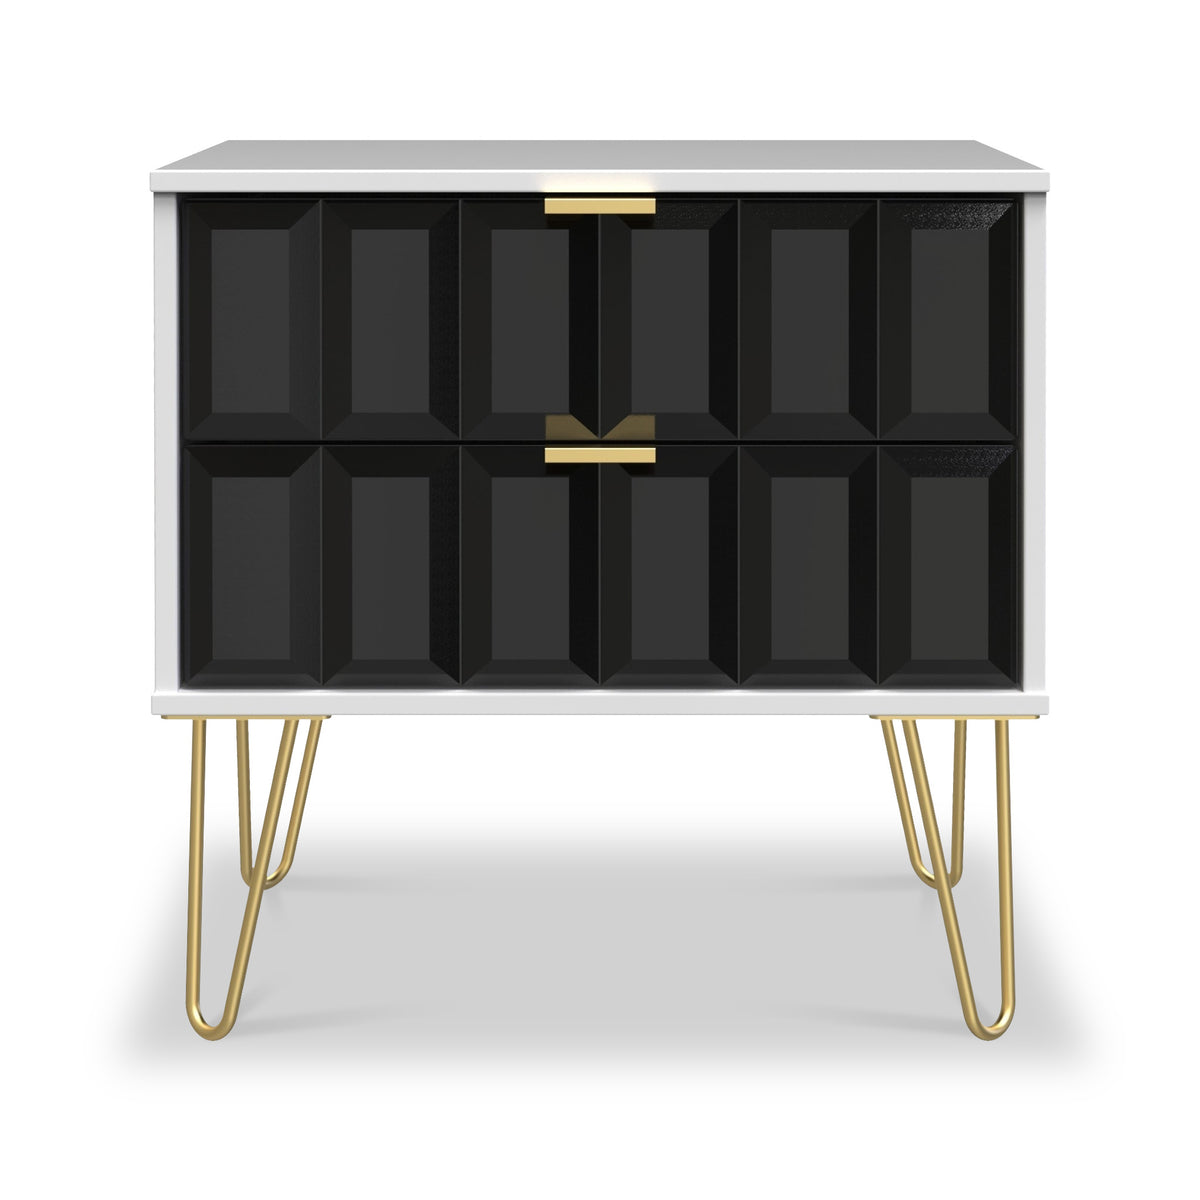 Harlow Black & White 2 Drawer Utility Chest with Gold Hairpin Legs